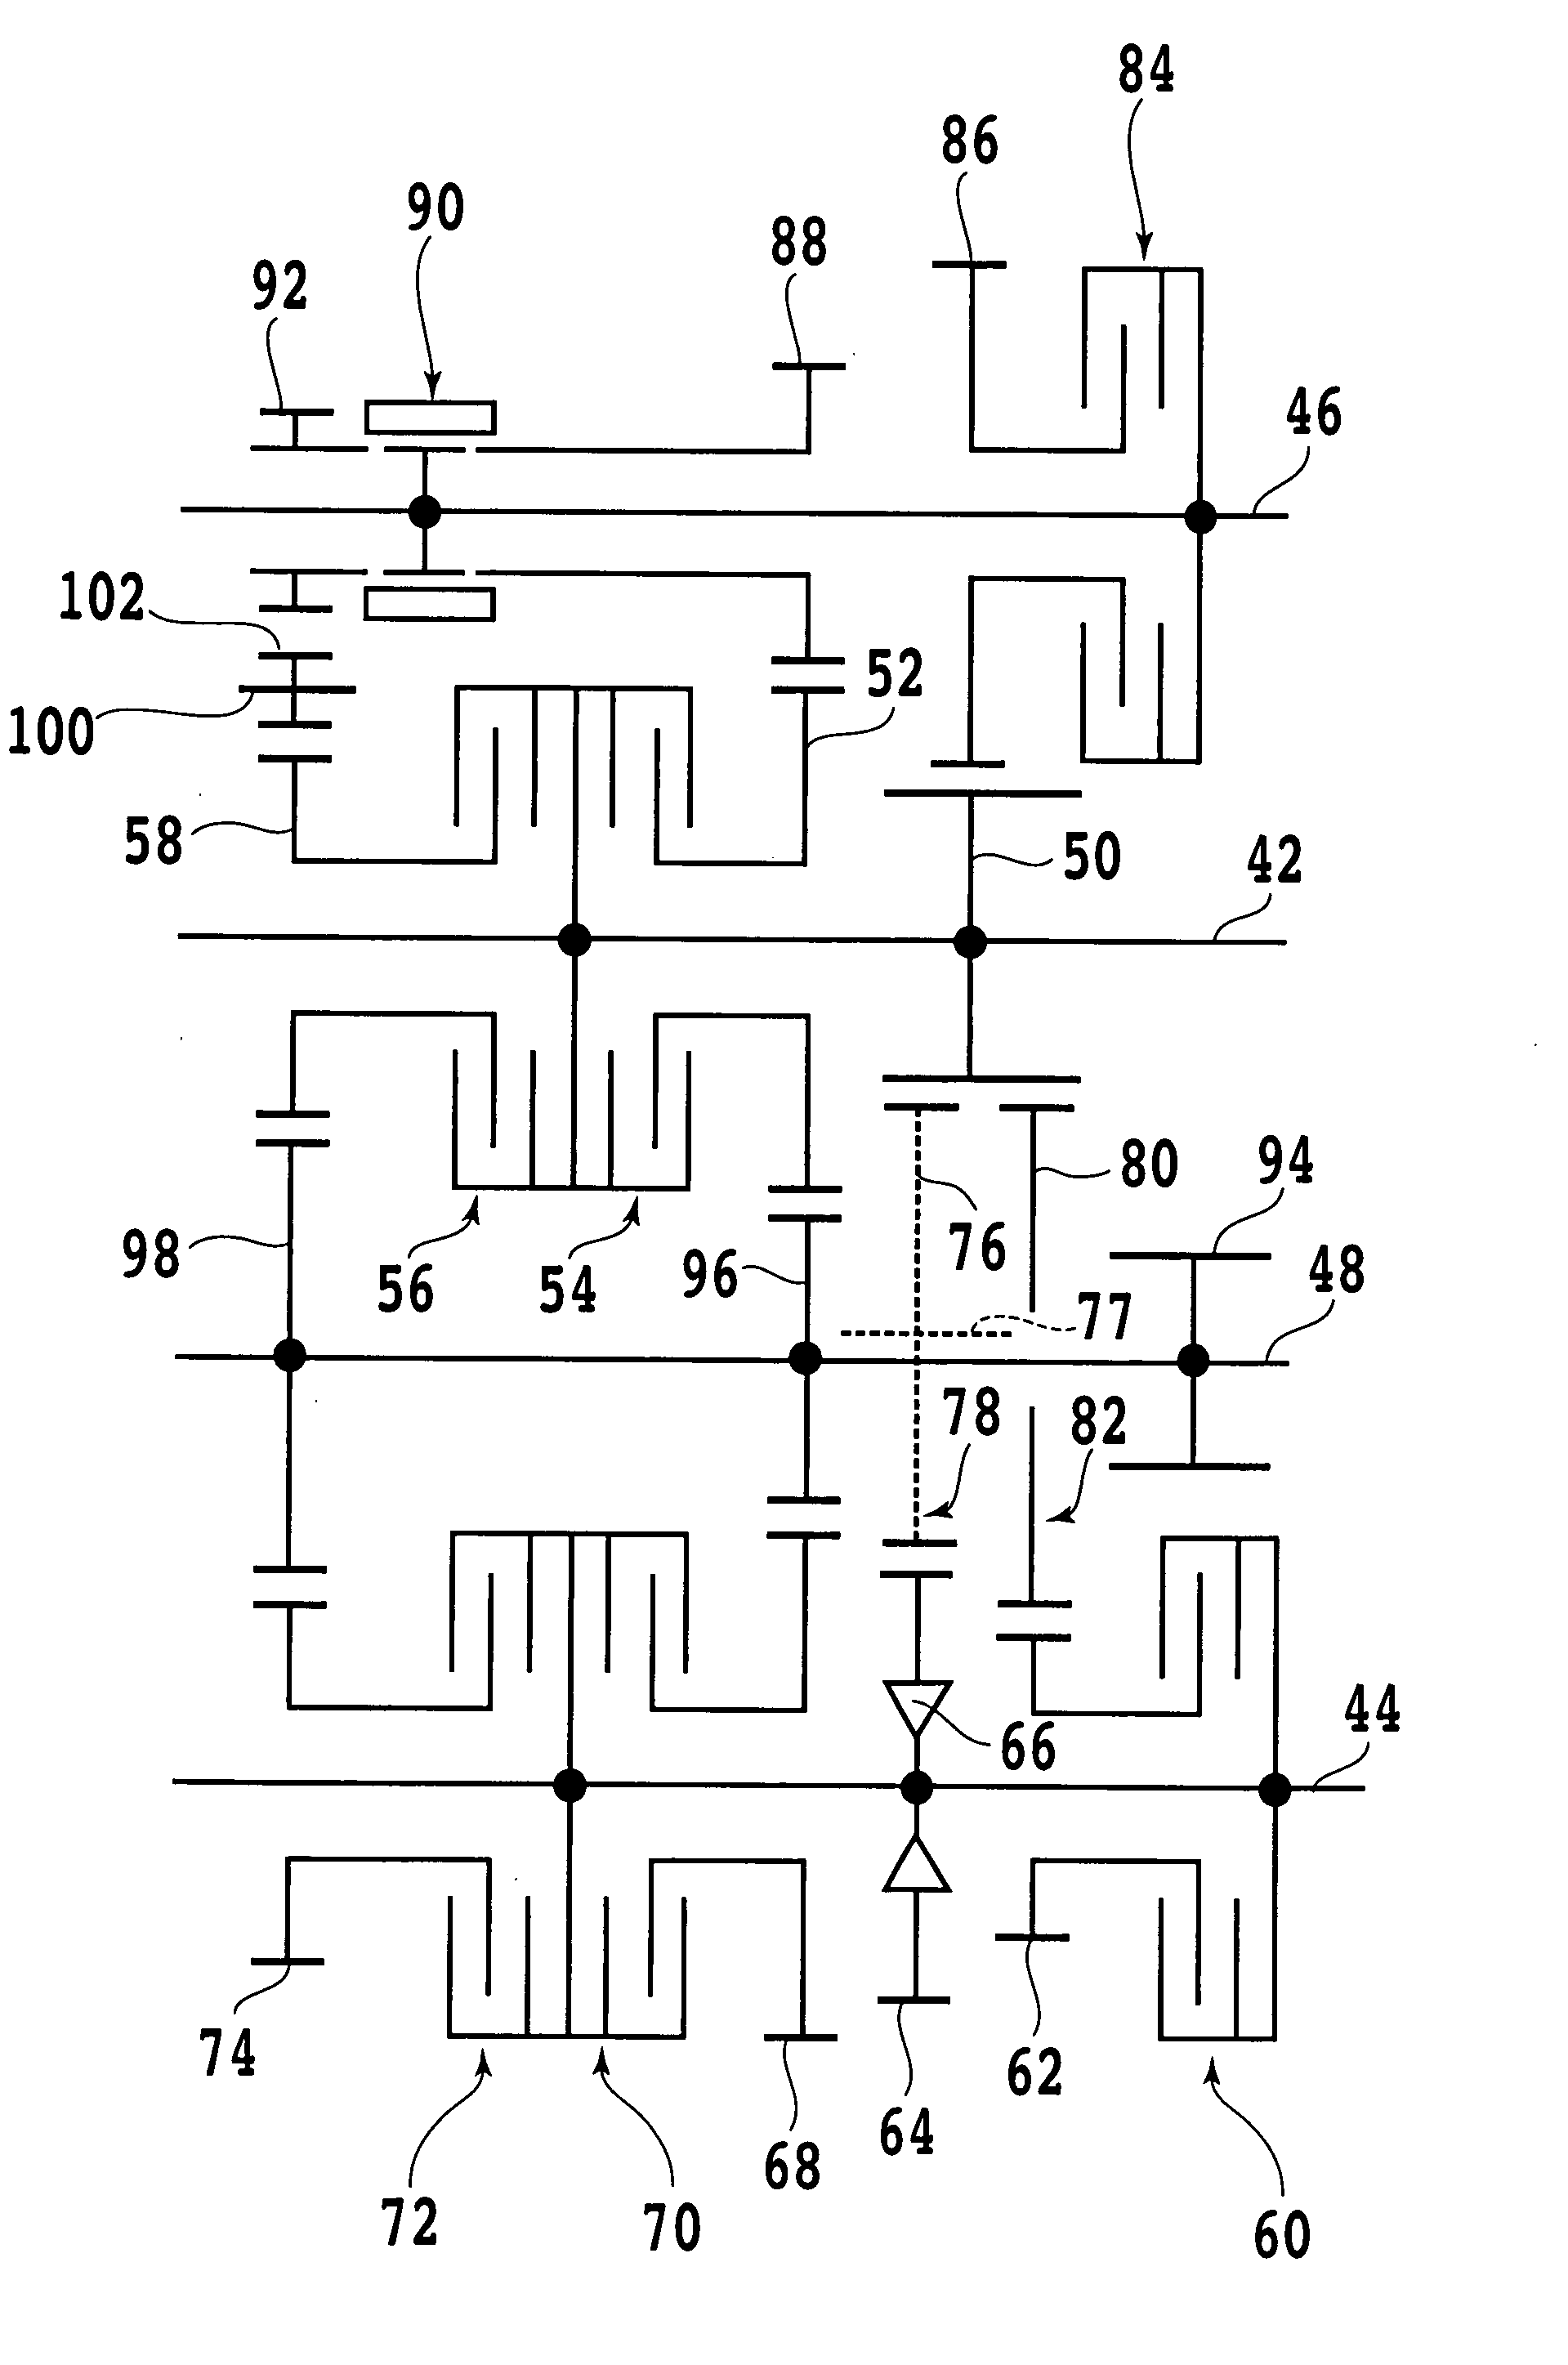 Parallel axes type transmission having a plurality of idle drive routes